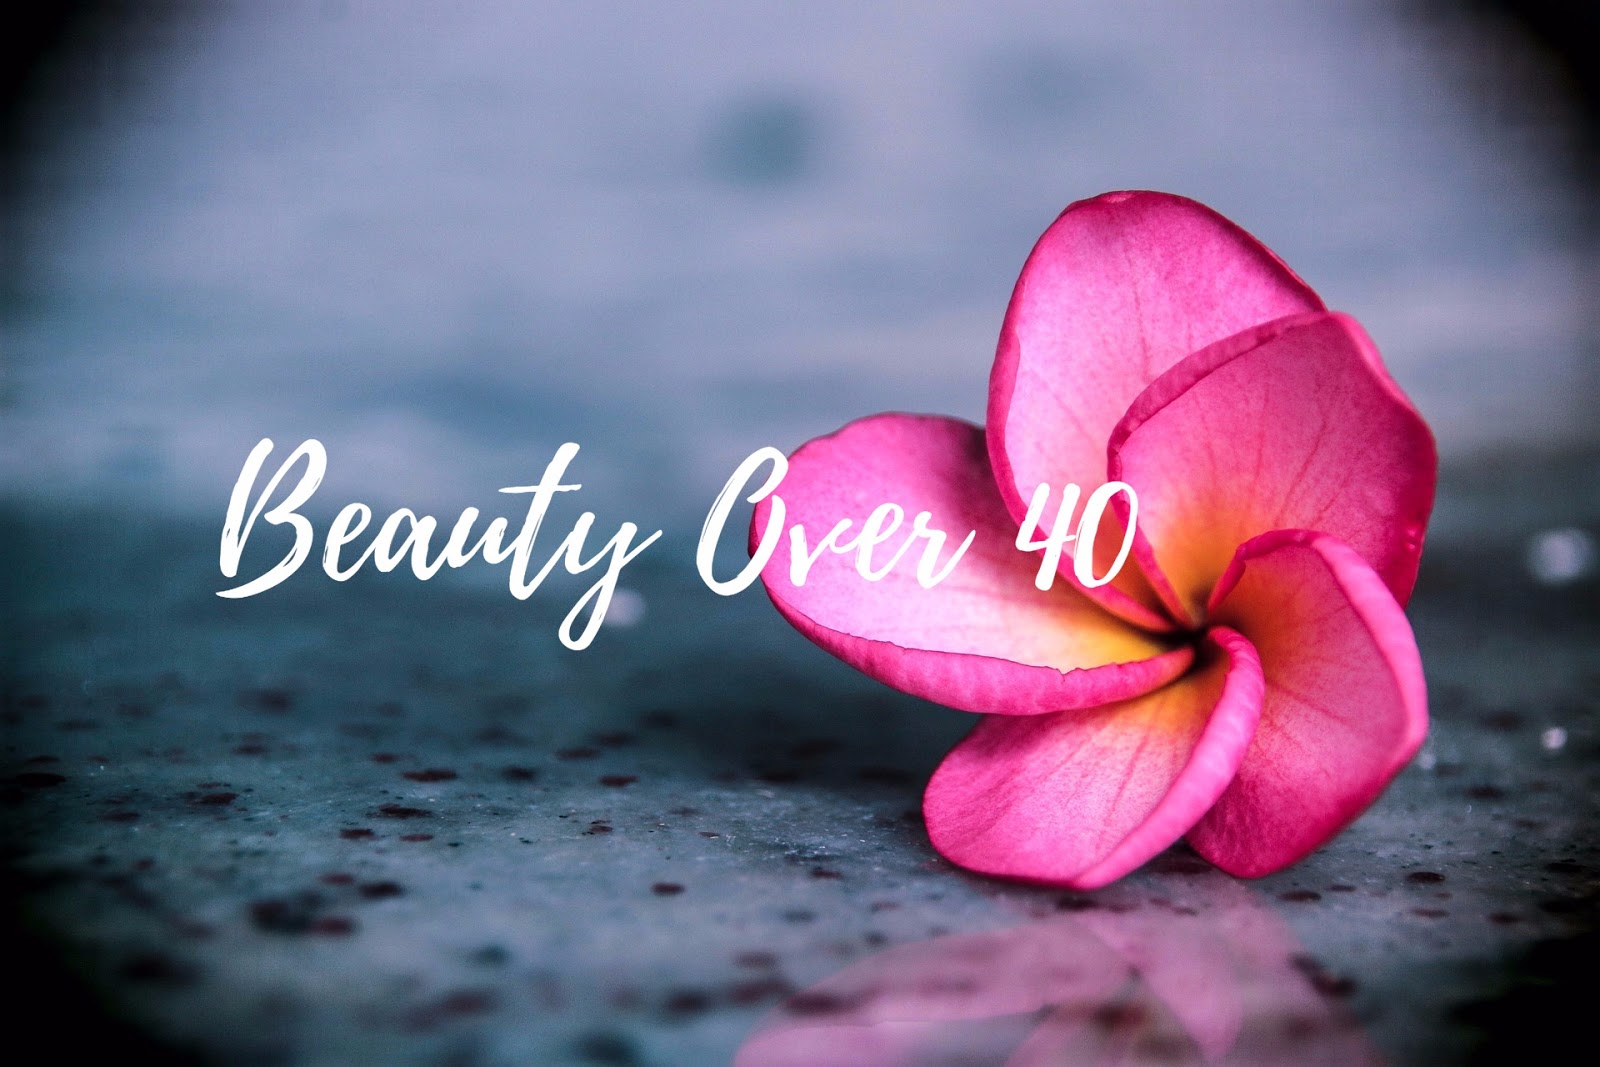 beauty over 40, beauty tips and tricks 40 years and above